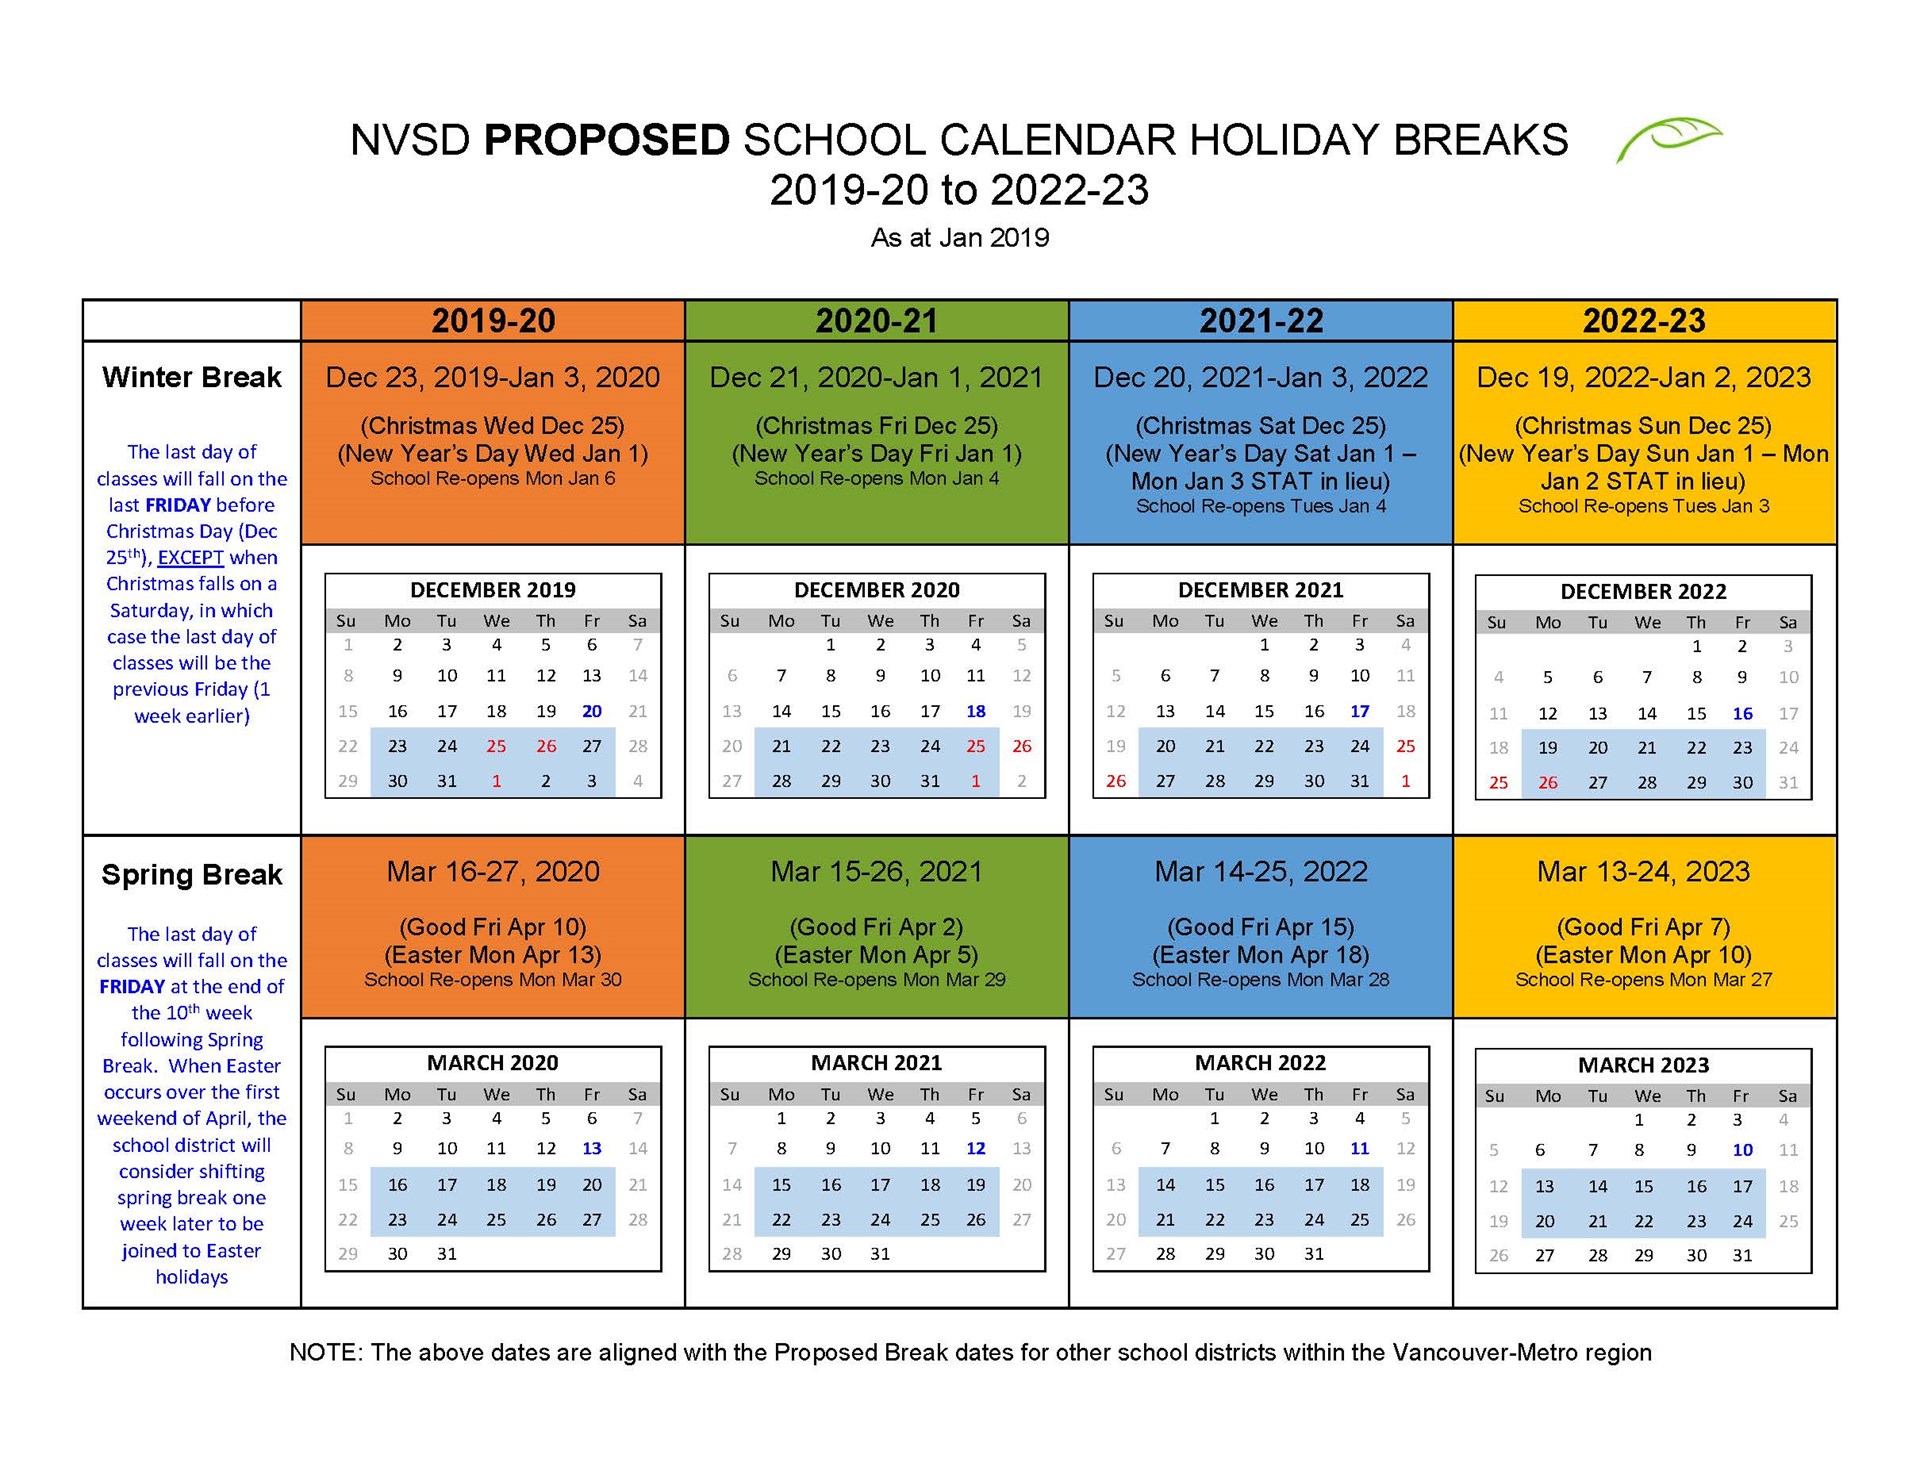 Providence College Spring 2023 Calendar 2023 New Amazing The Best